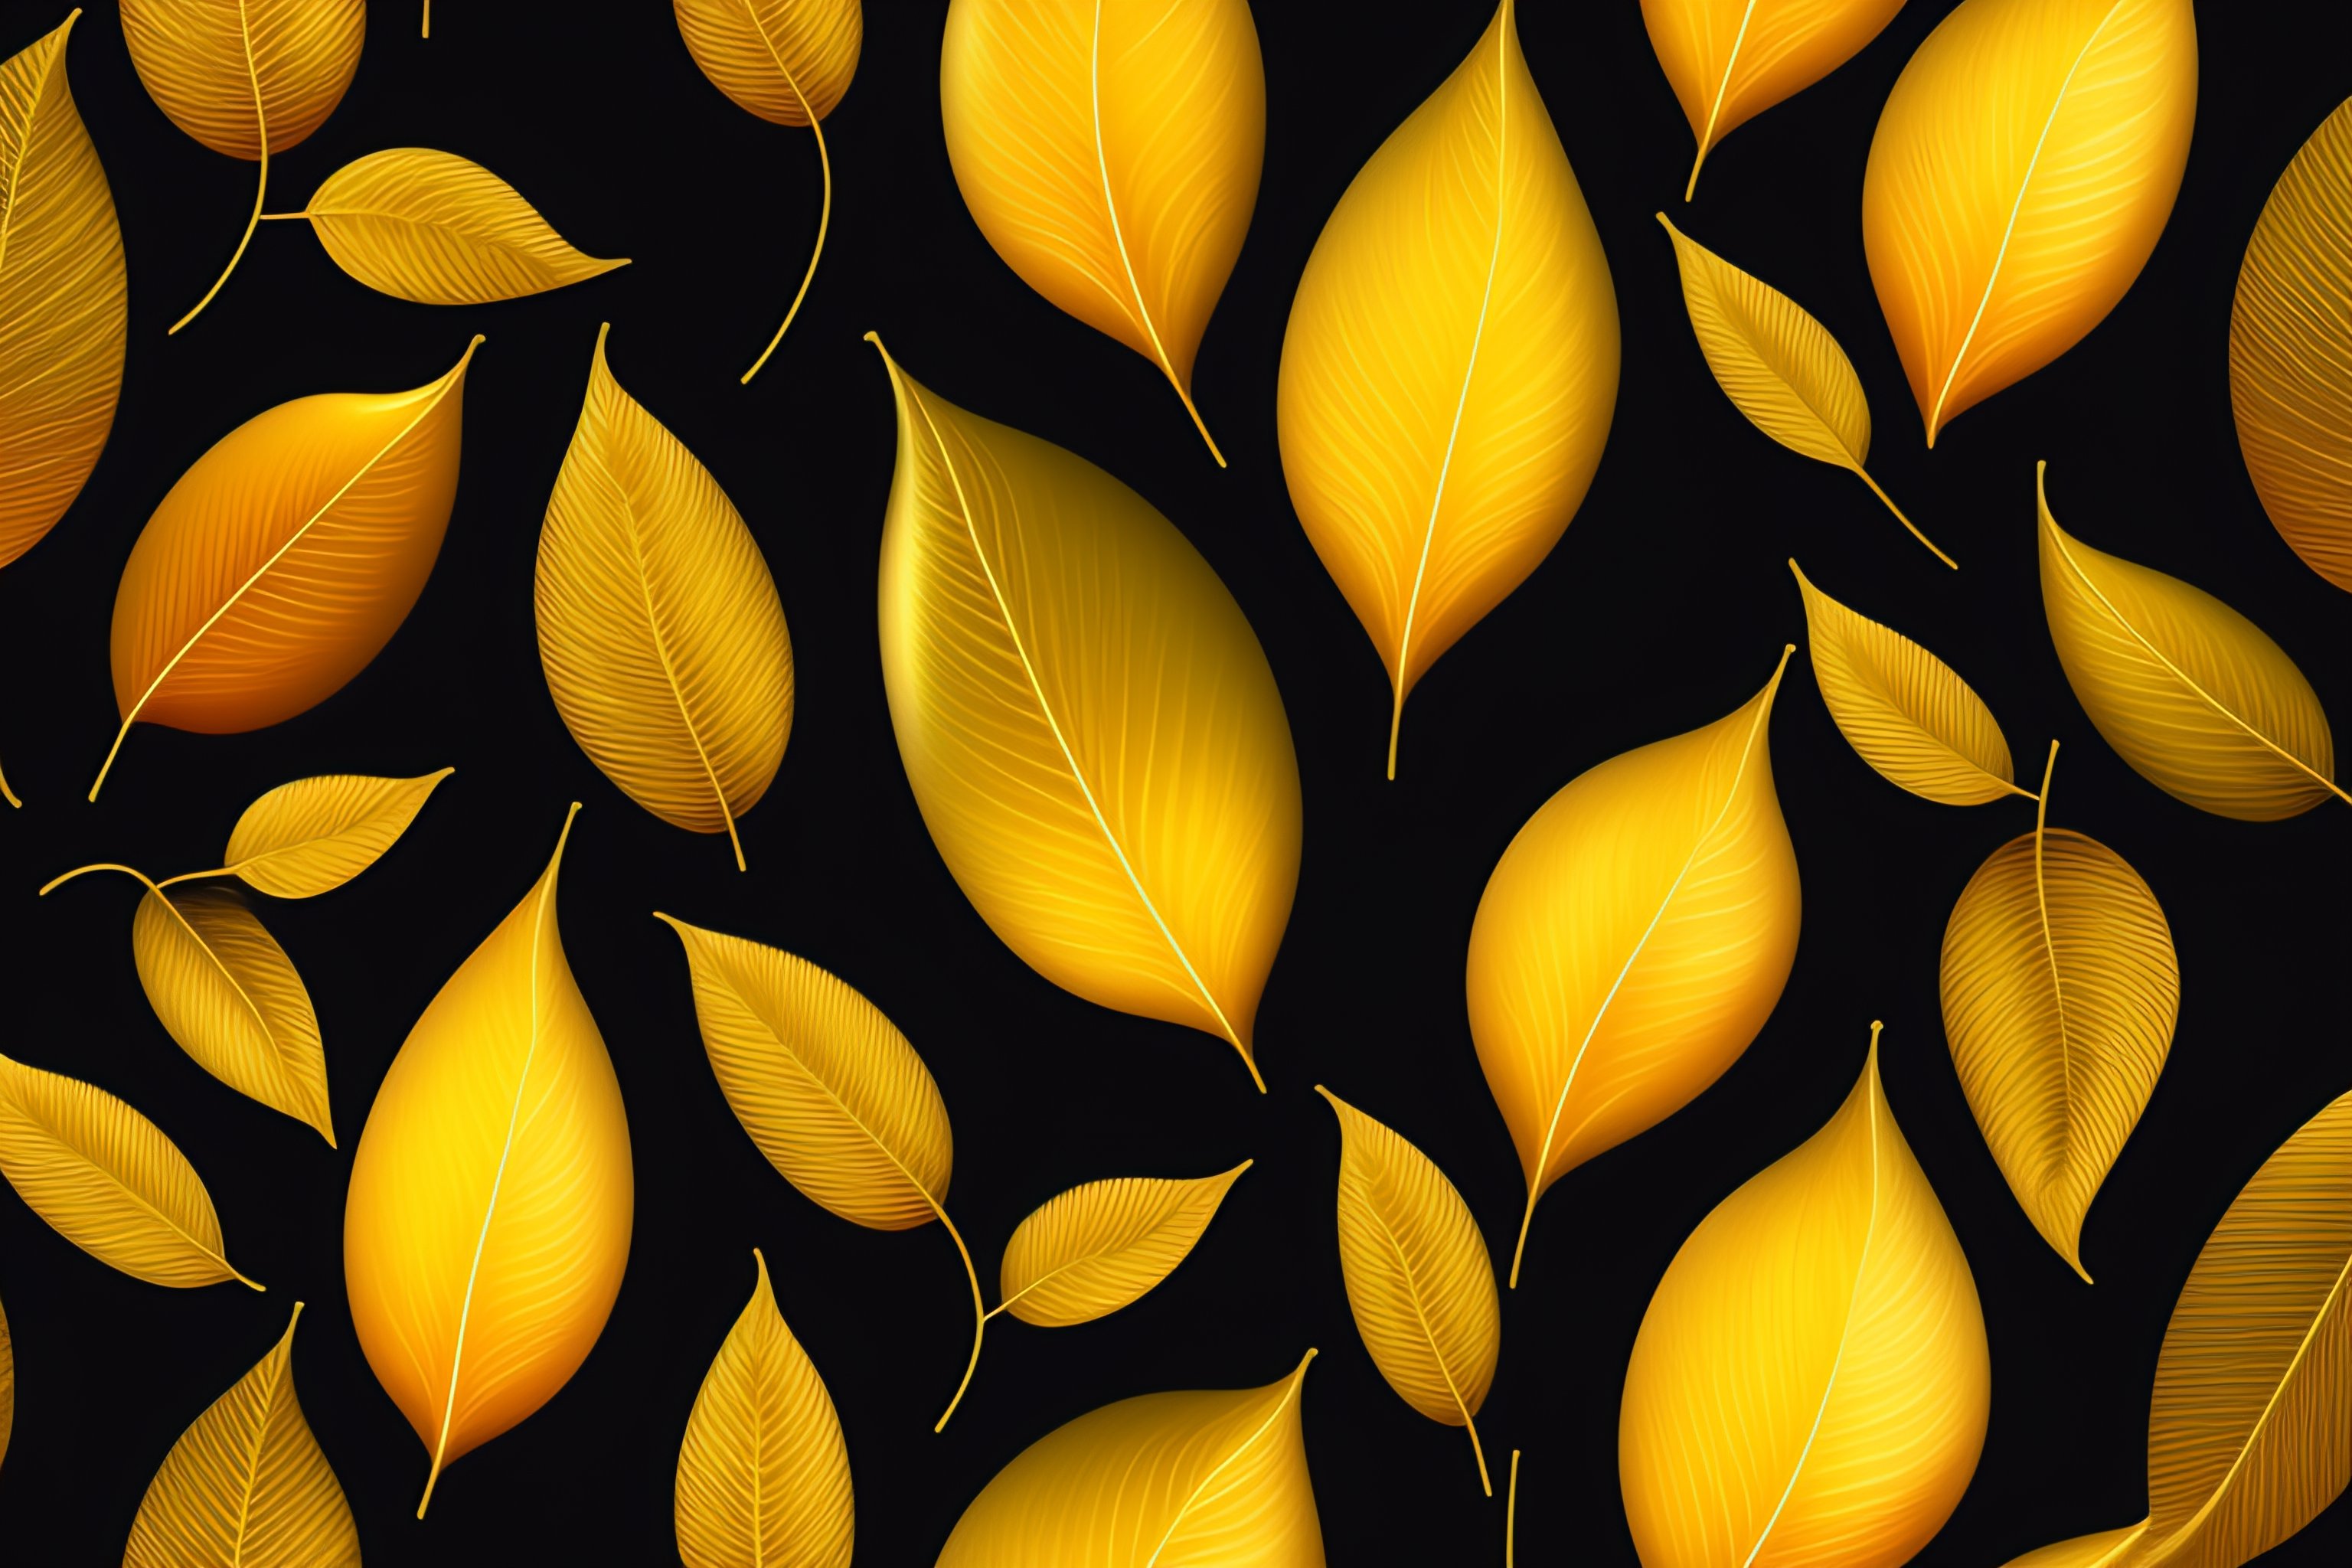 Lexica - A pattern of metallic gold leaves fades into the background